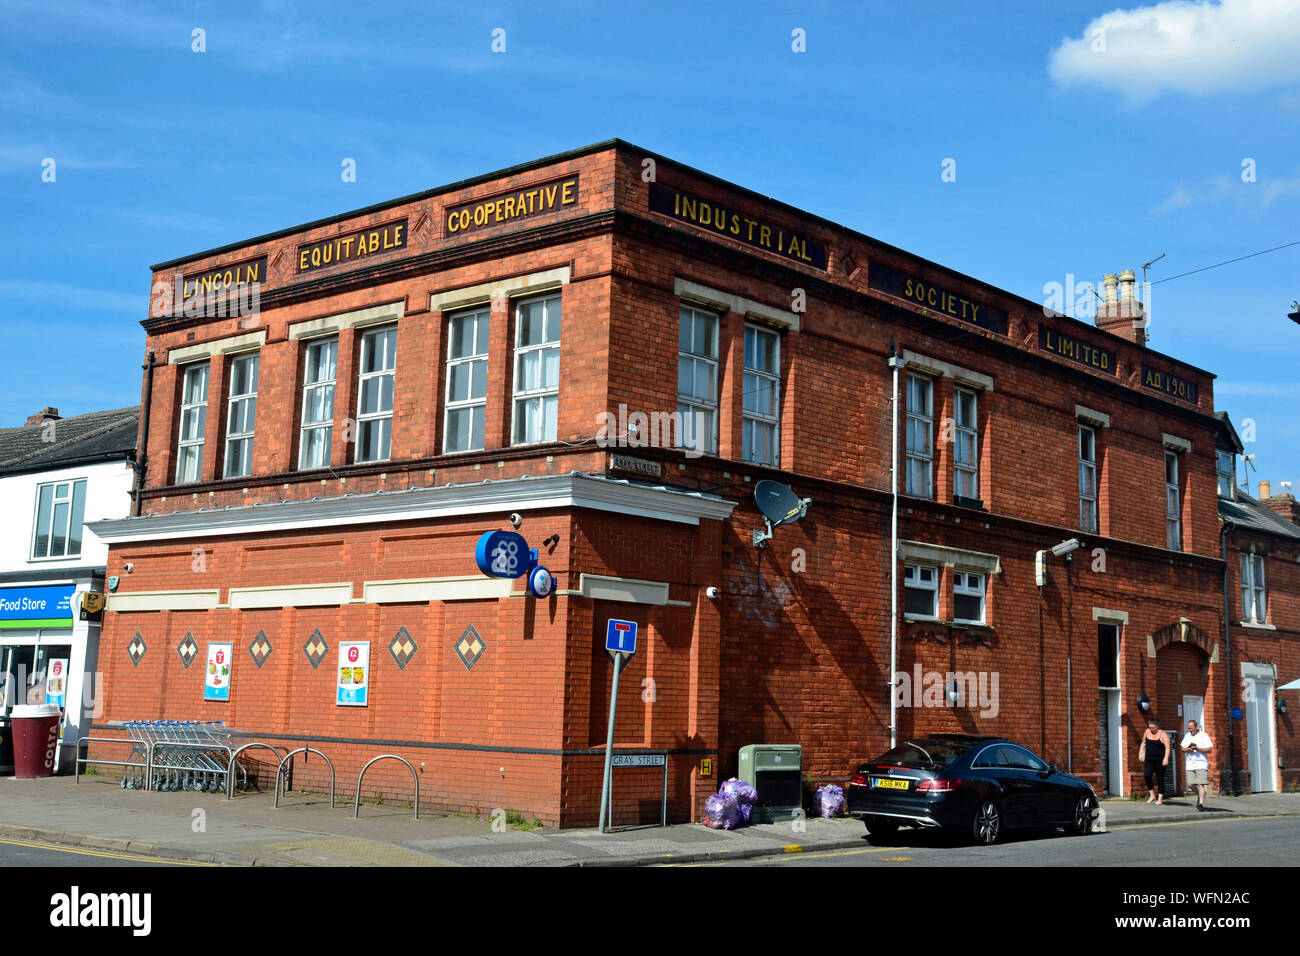 Lincoln Equitable Co-operative Industrial Society Limited. AD 1901. The old Co-op building in Lincoln, Lincolnshire, UK. Stock Photo